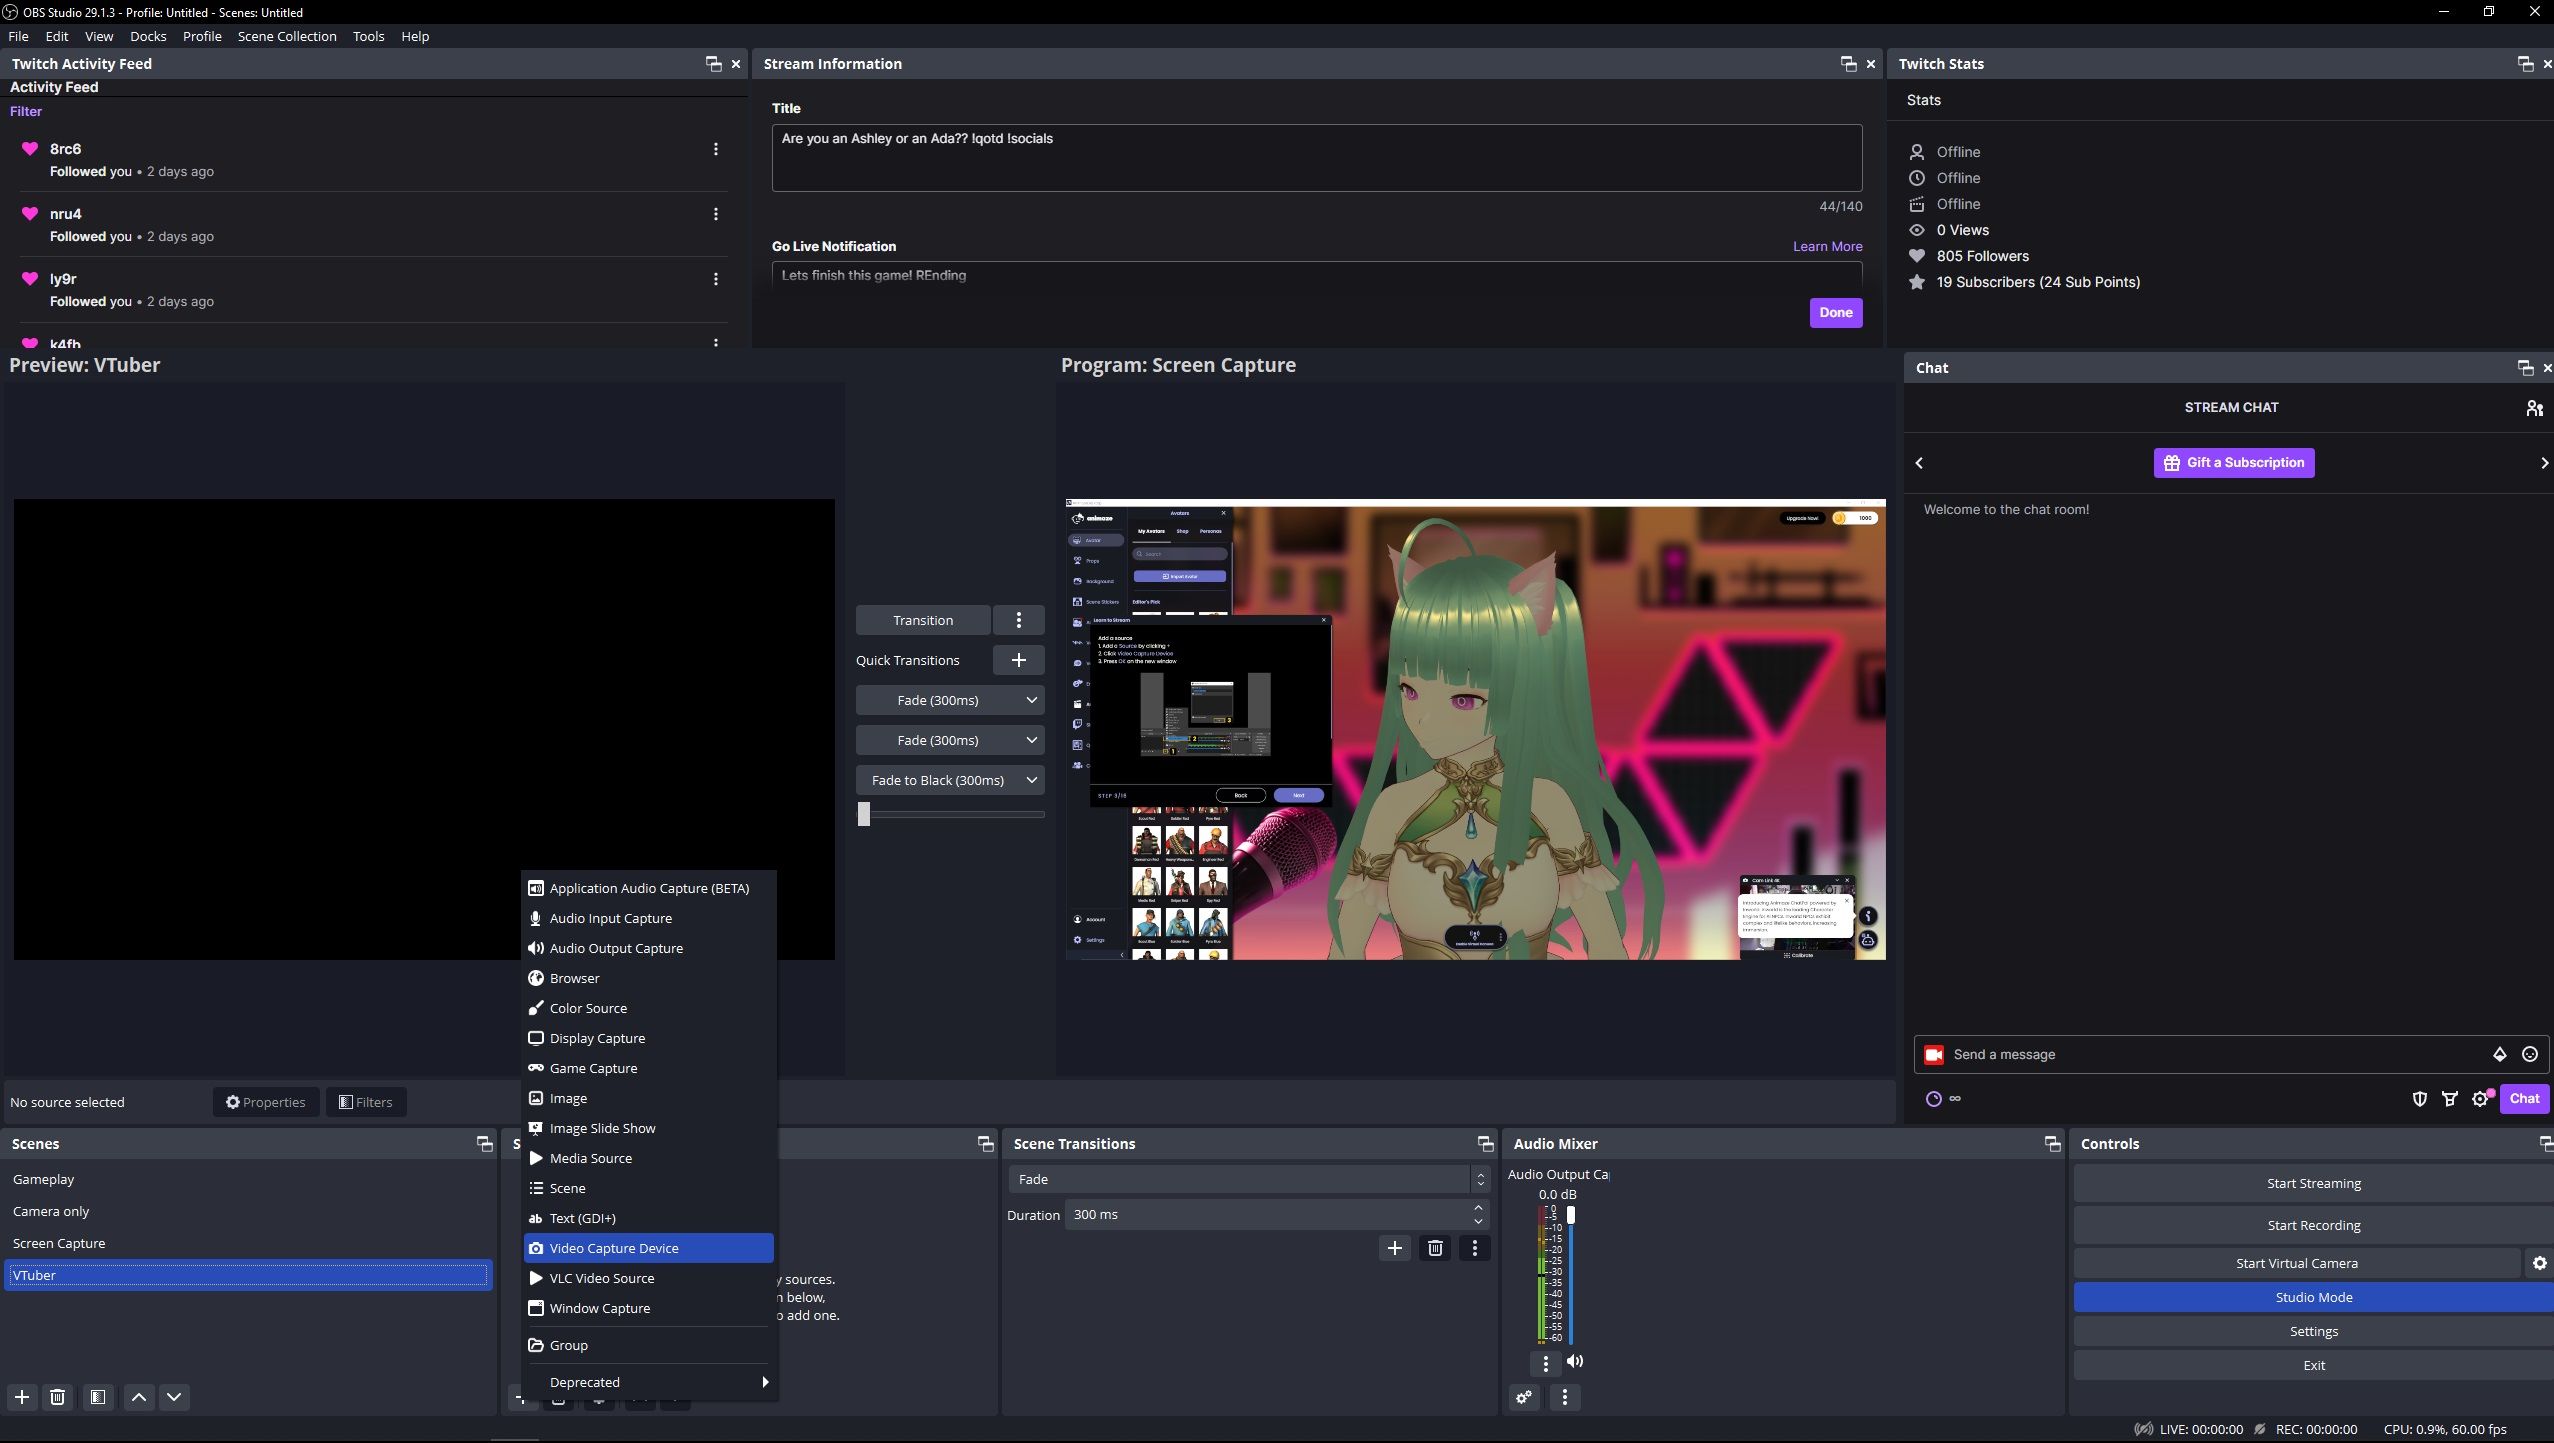 Add Video Capture Device on OBS to Add VTuber Avatar